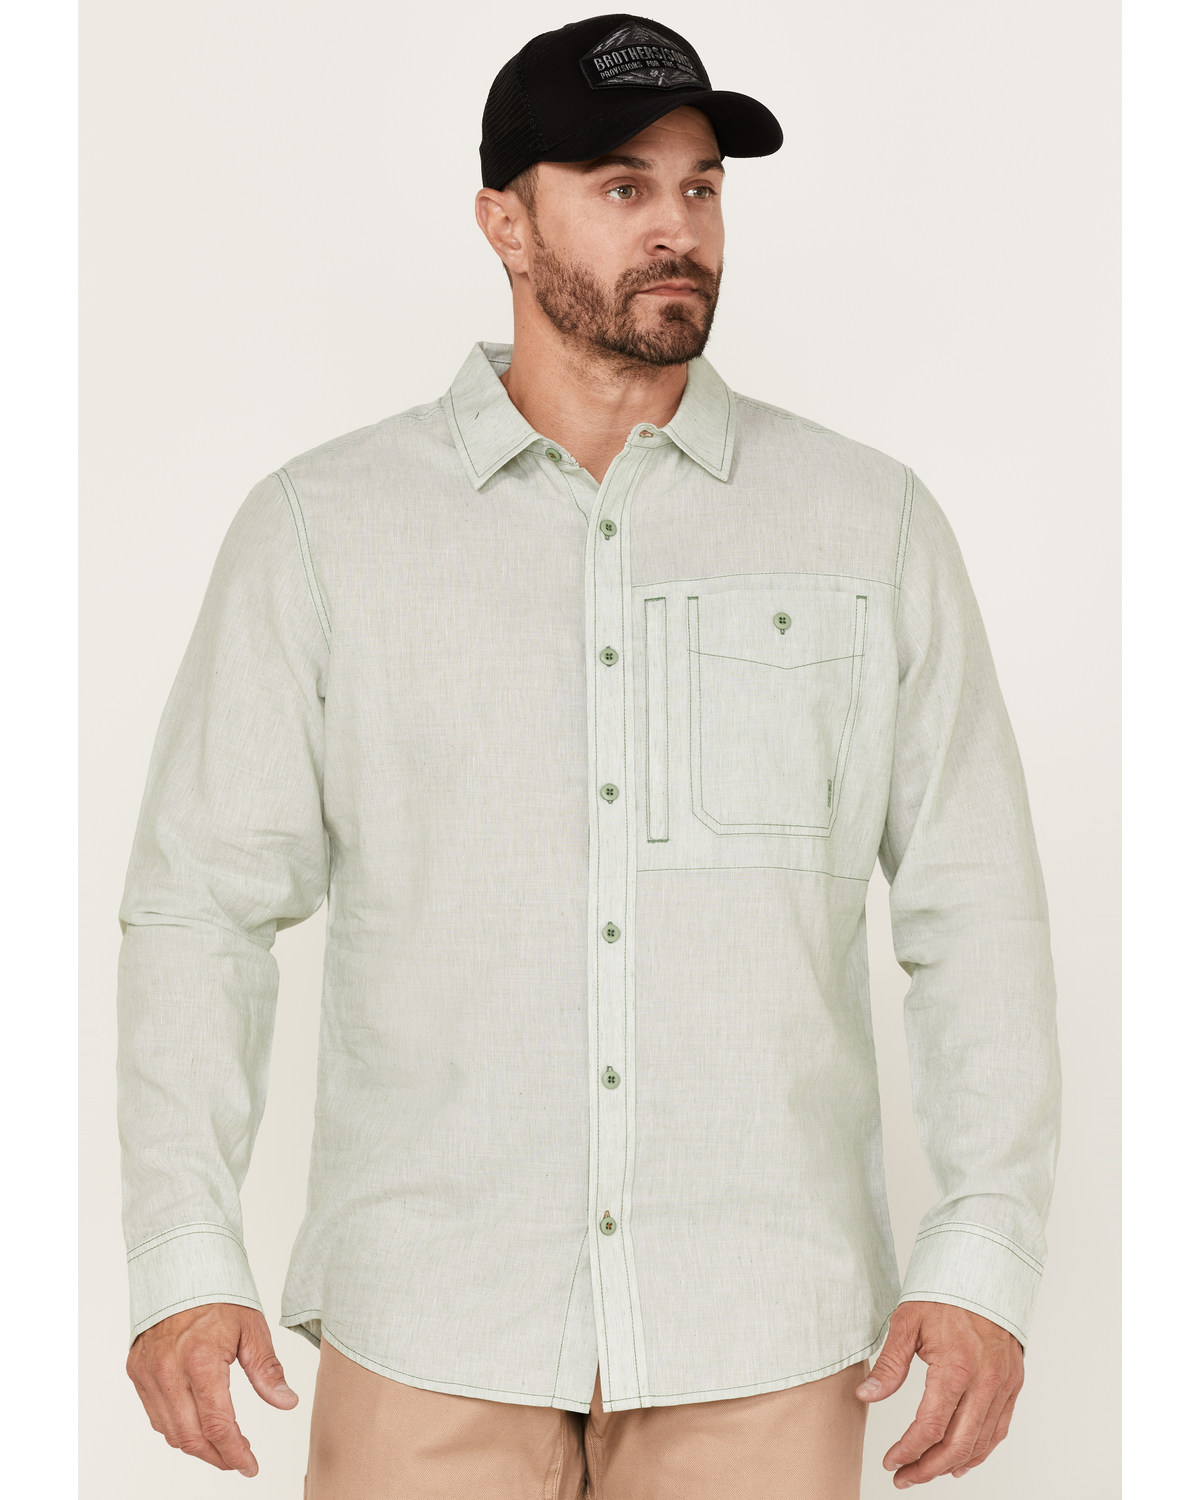 Brothers and Sons Men's Performance Solid Long Sleeve Button Down Western Shirt